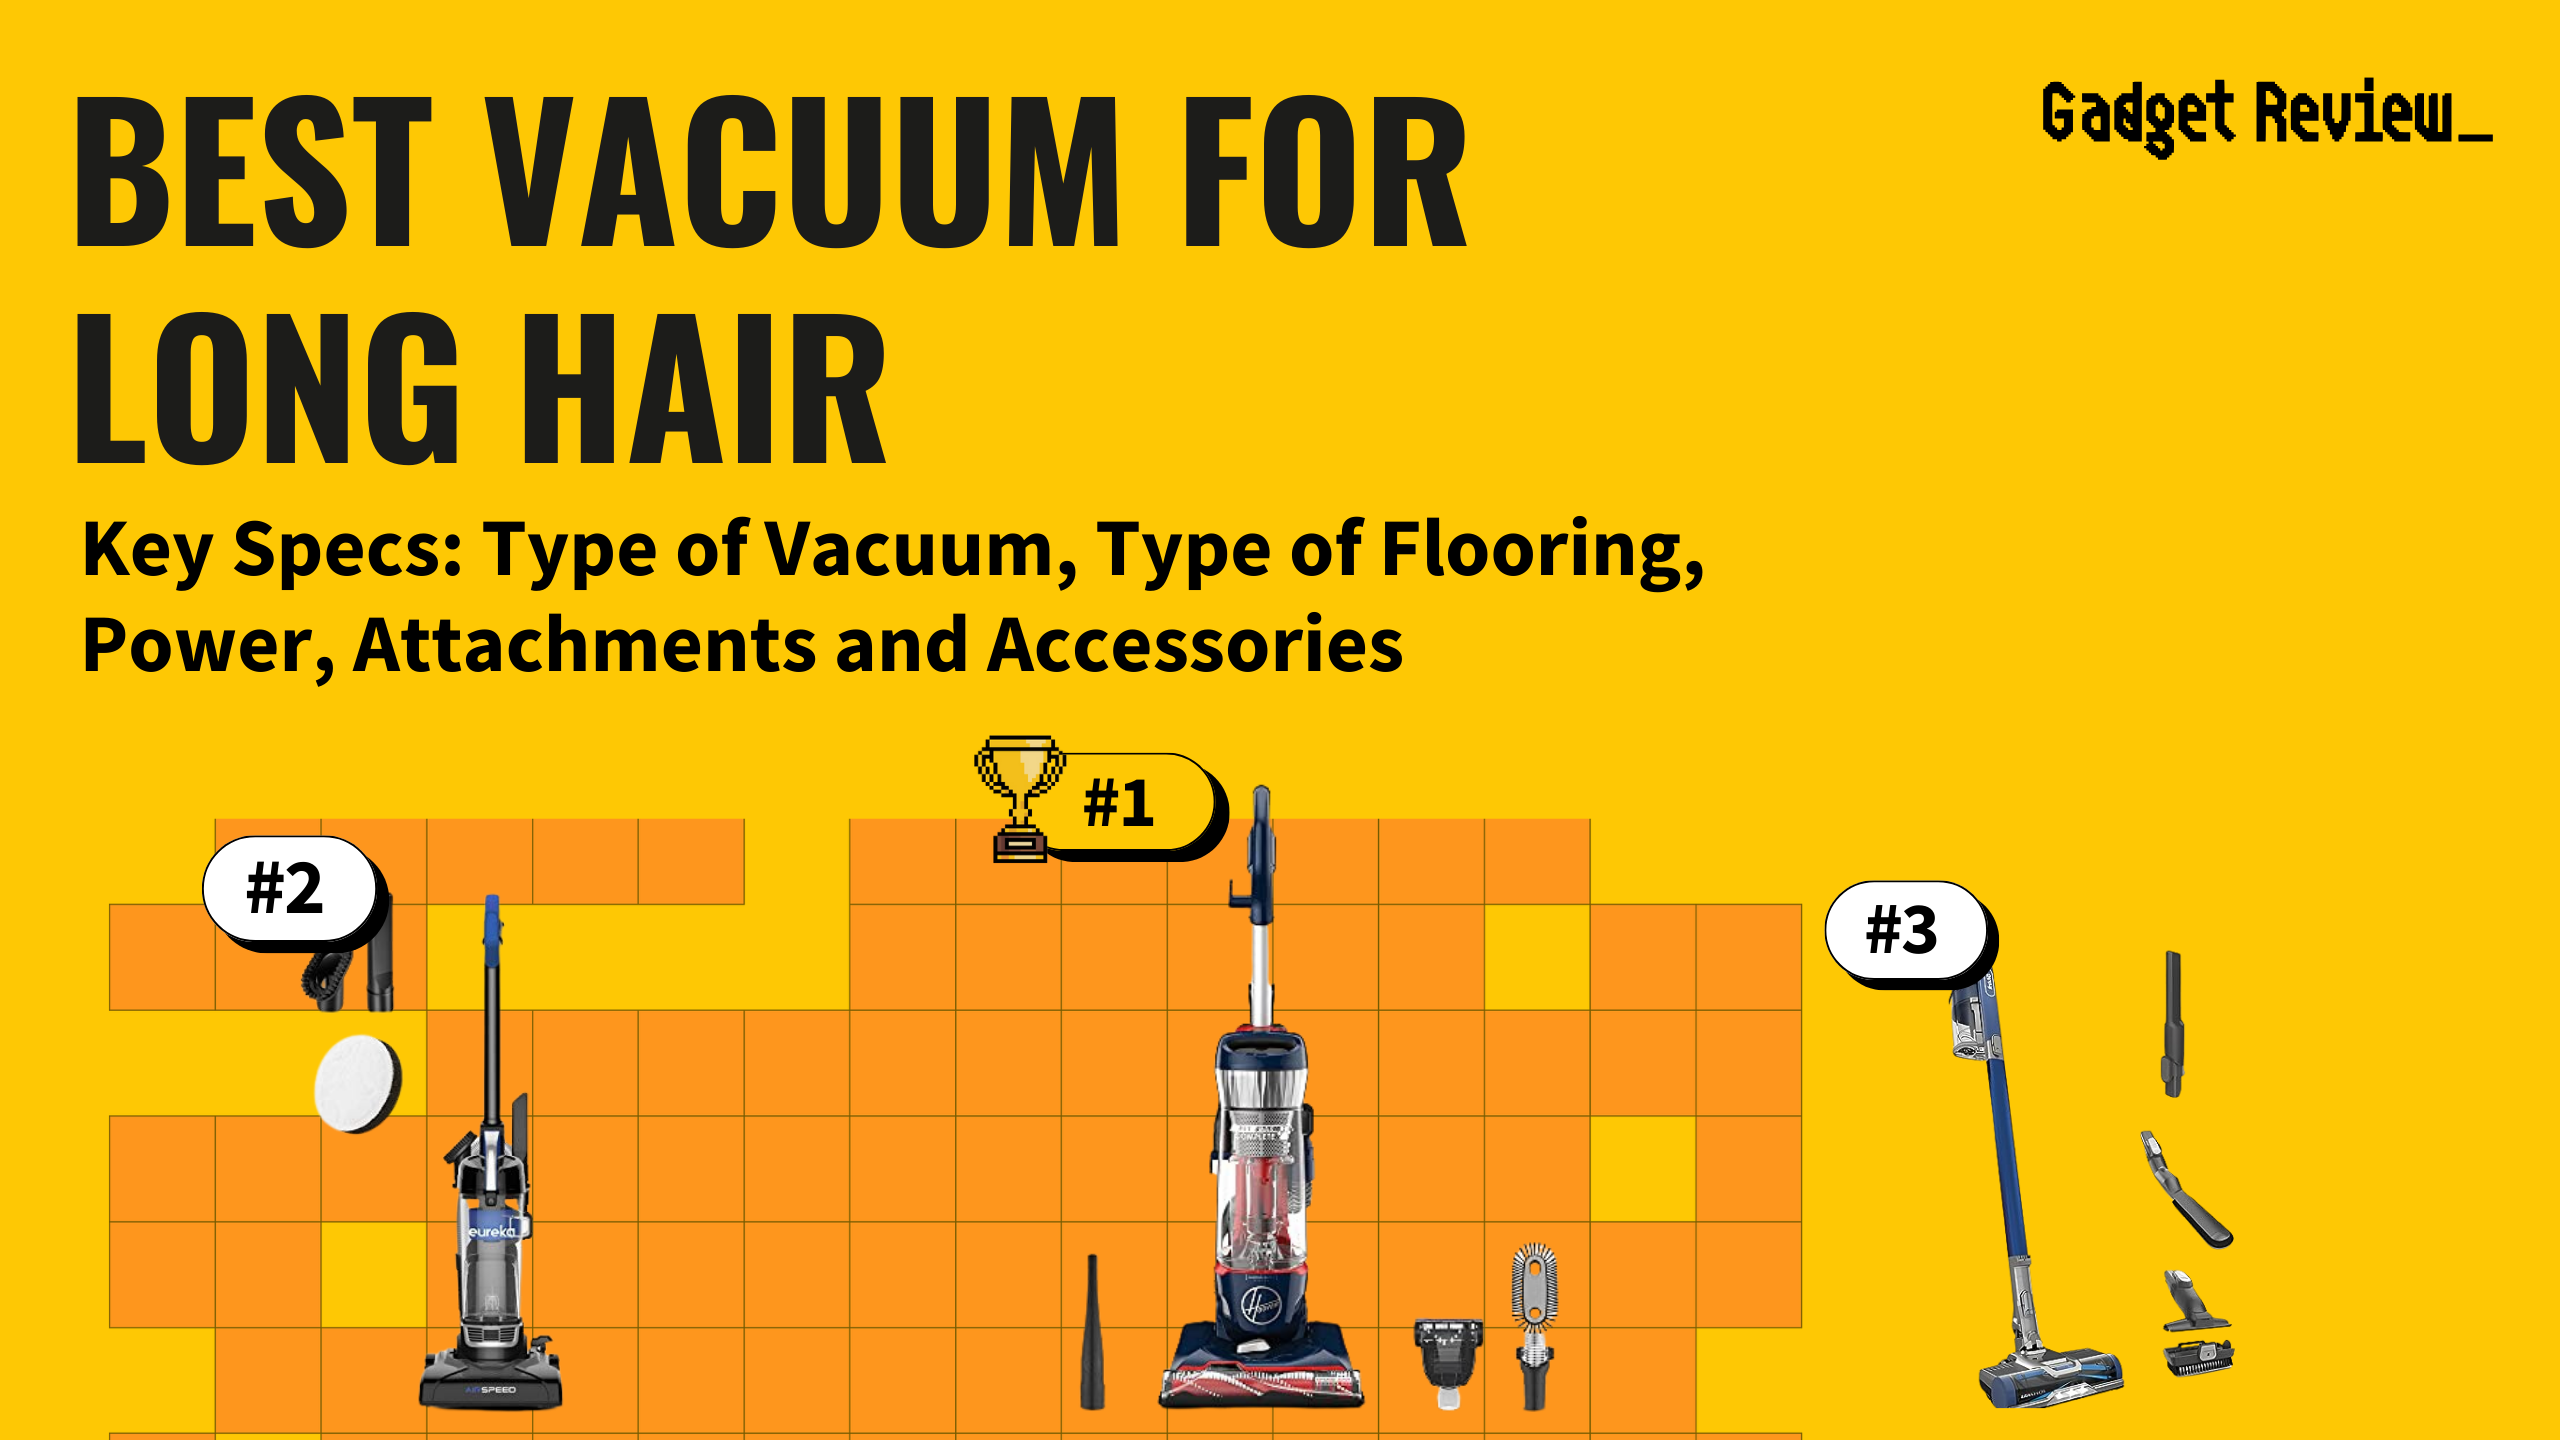 best vacuum for long hair guide that shows the top best vacuum cleaner model